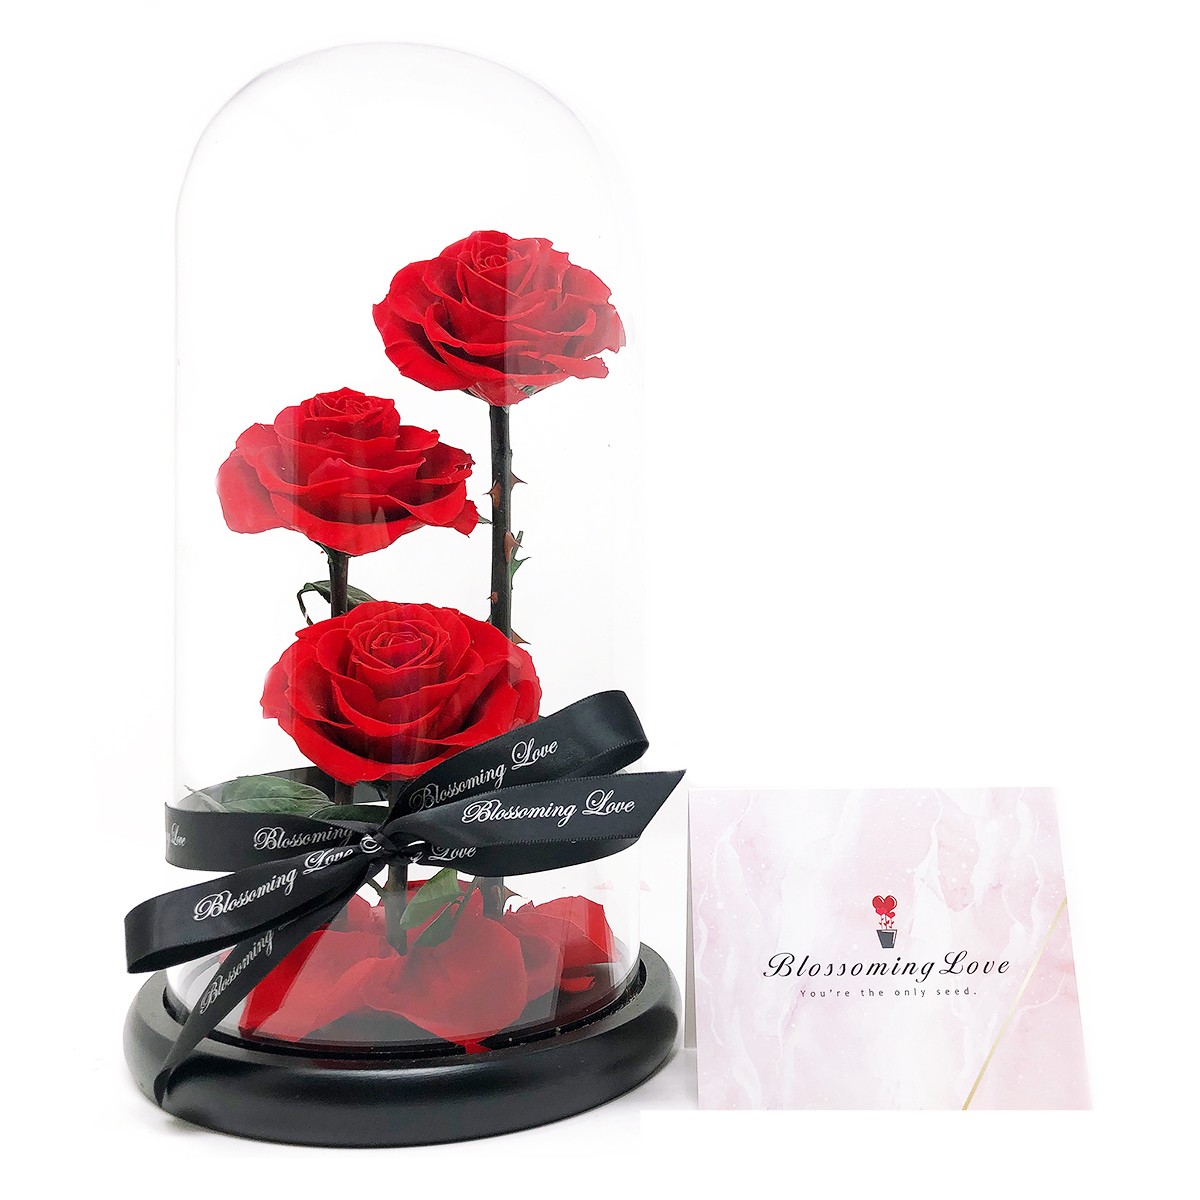 Blossoming Love Beauty and Beast Three Preserved Rose - Red